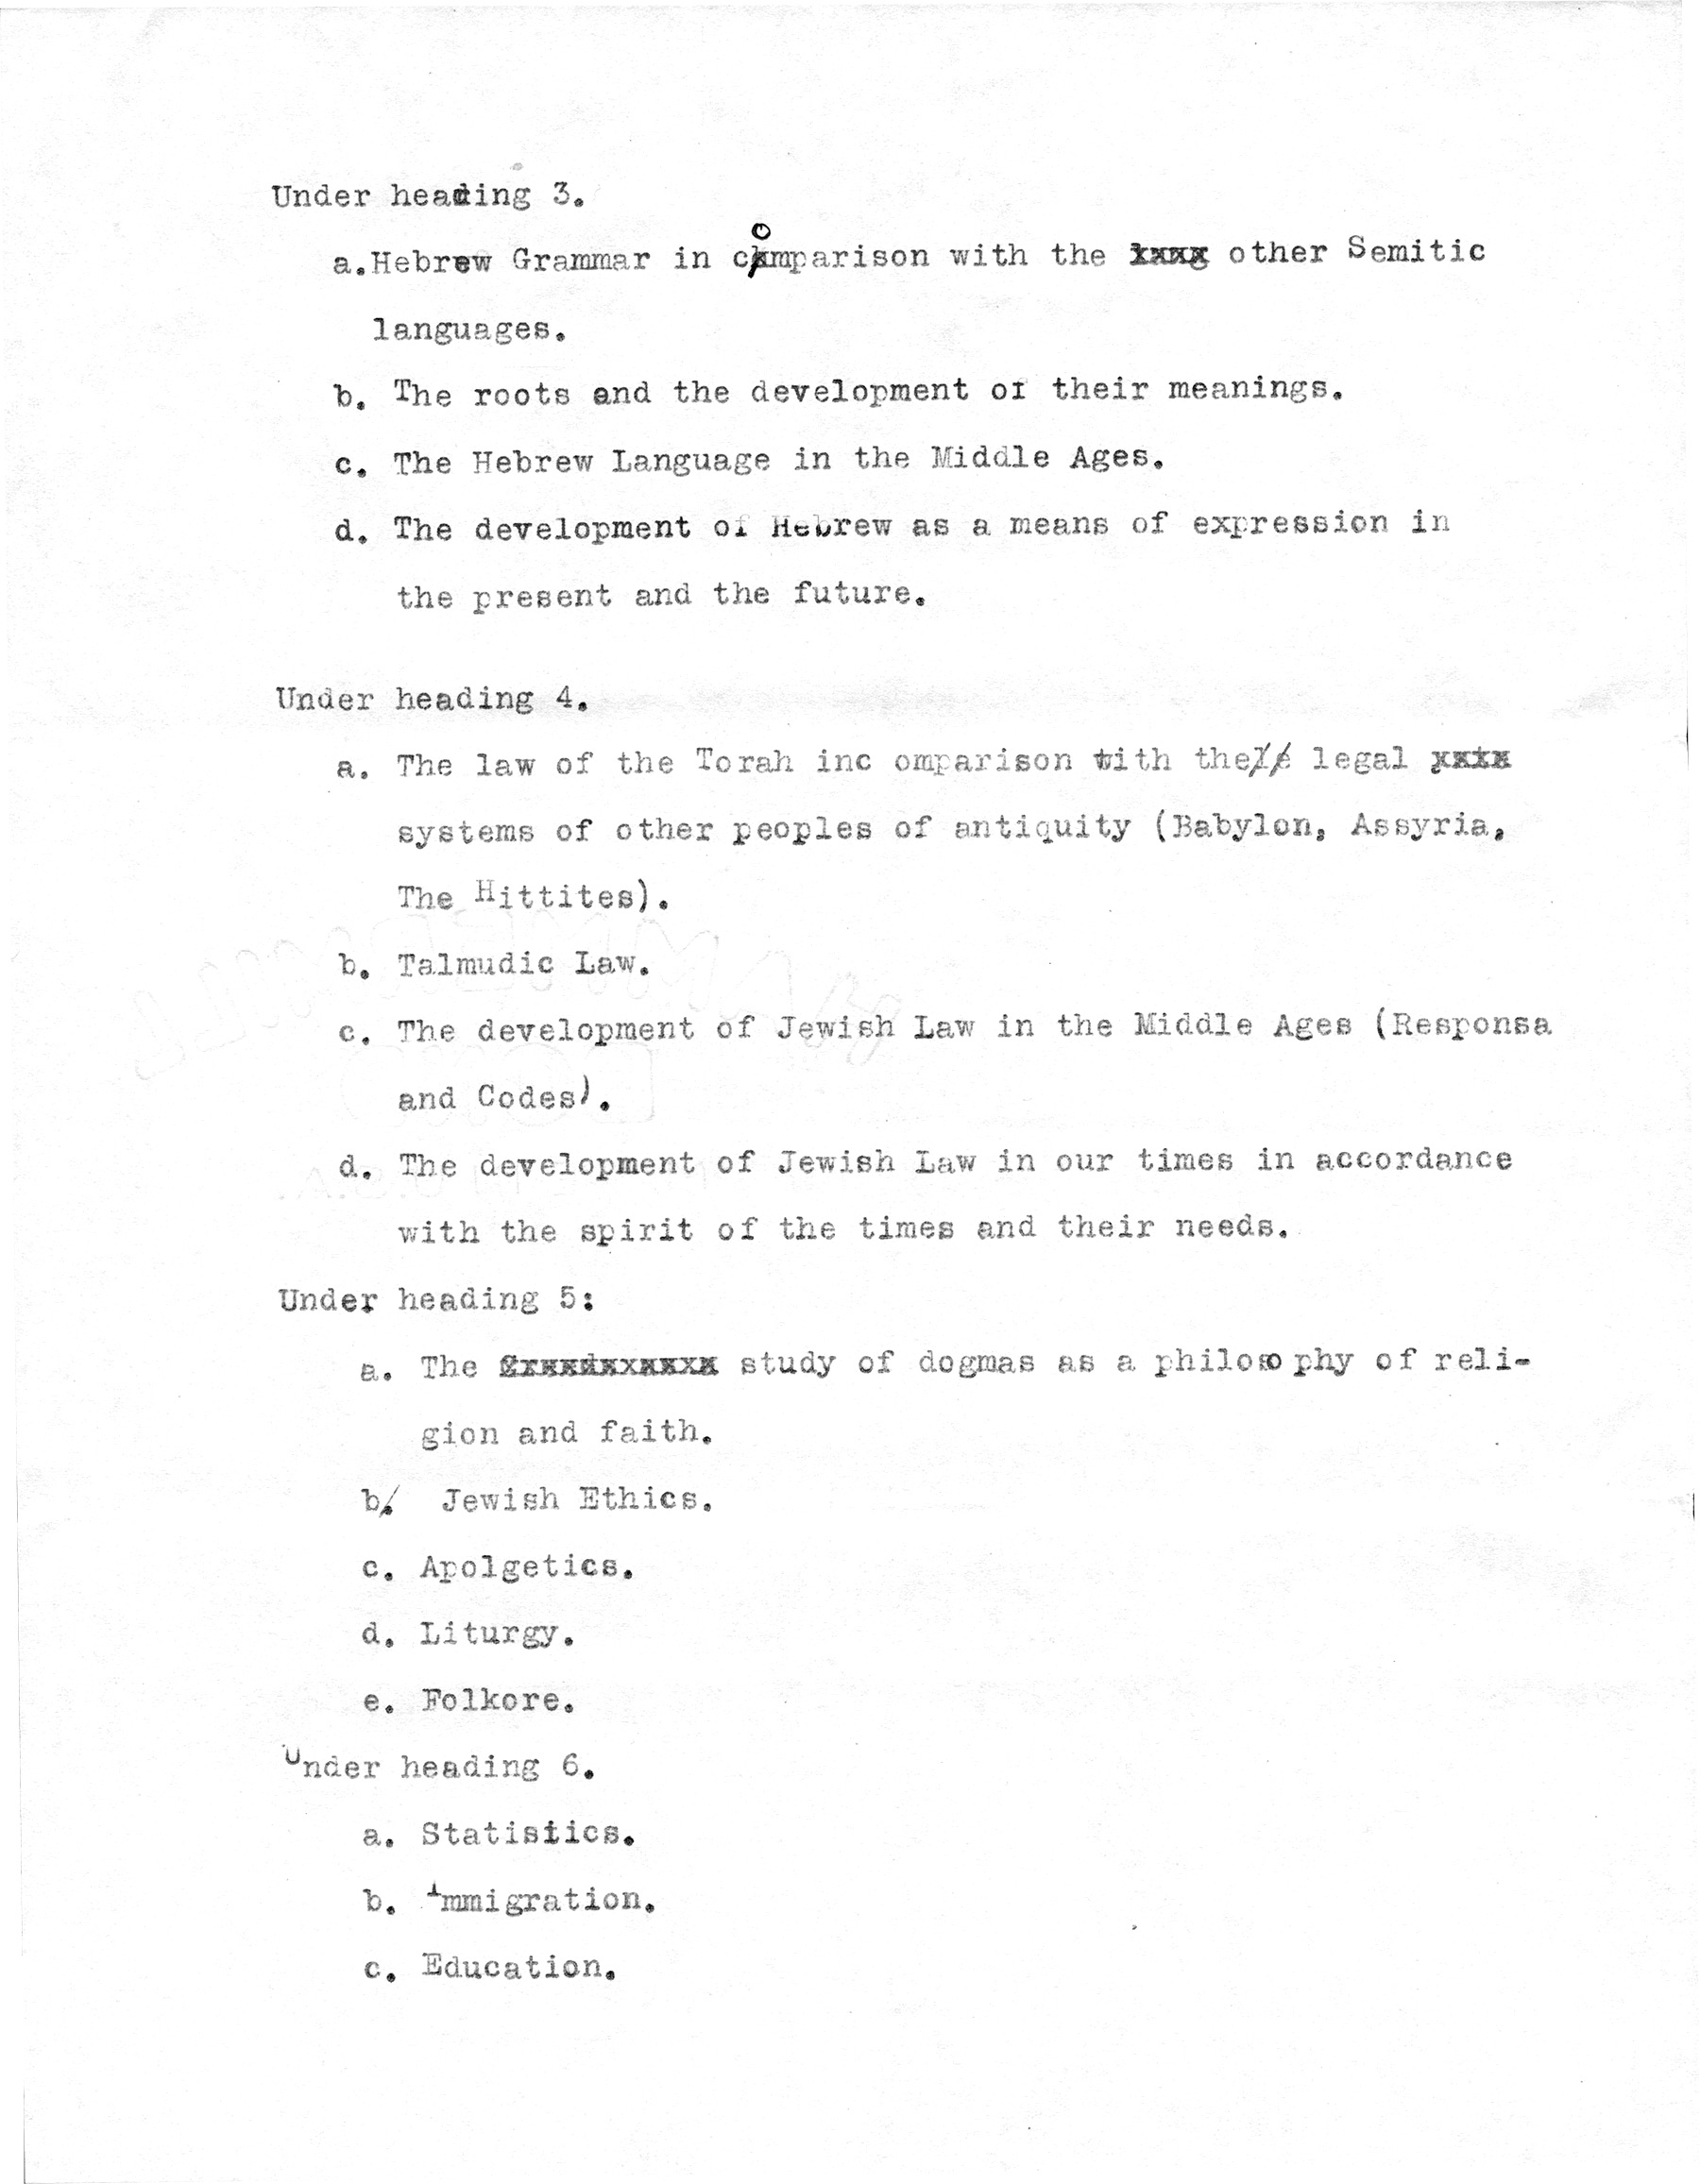 General Programme of the Congress, page 2